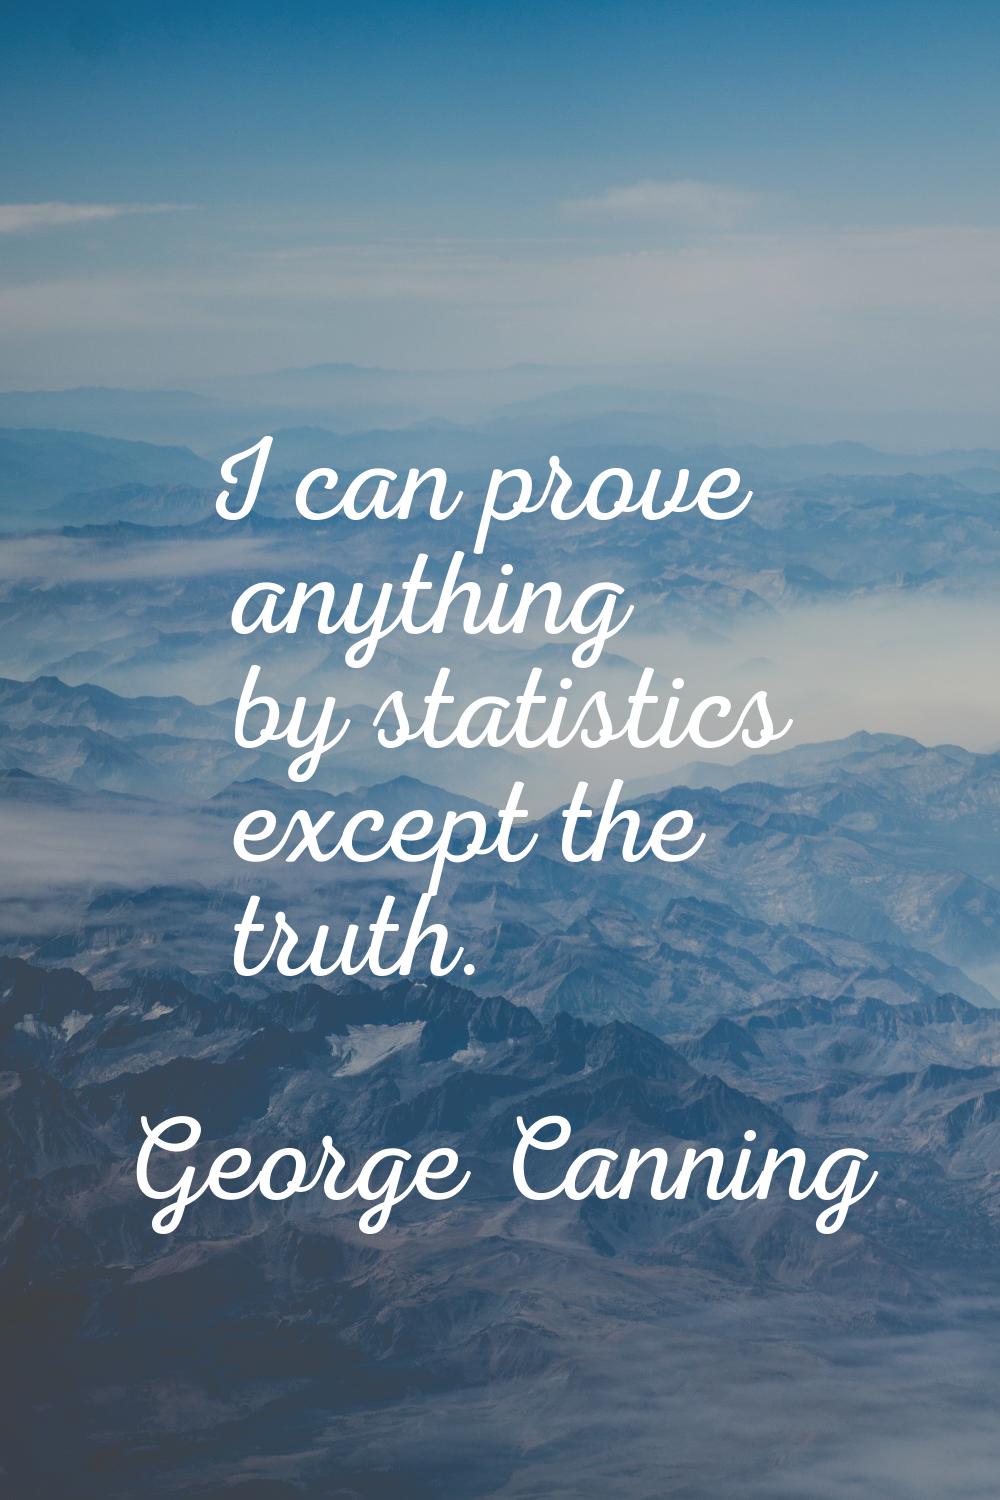 I can prove anything by statistics except the truth.